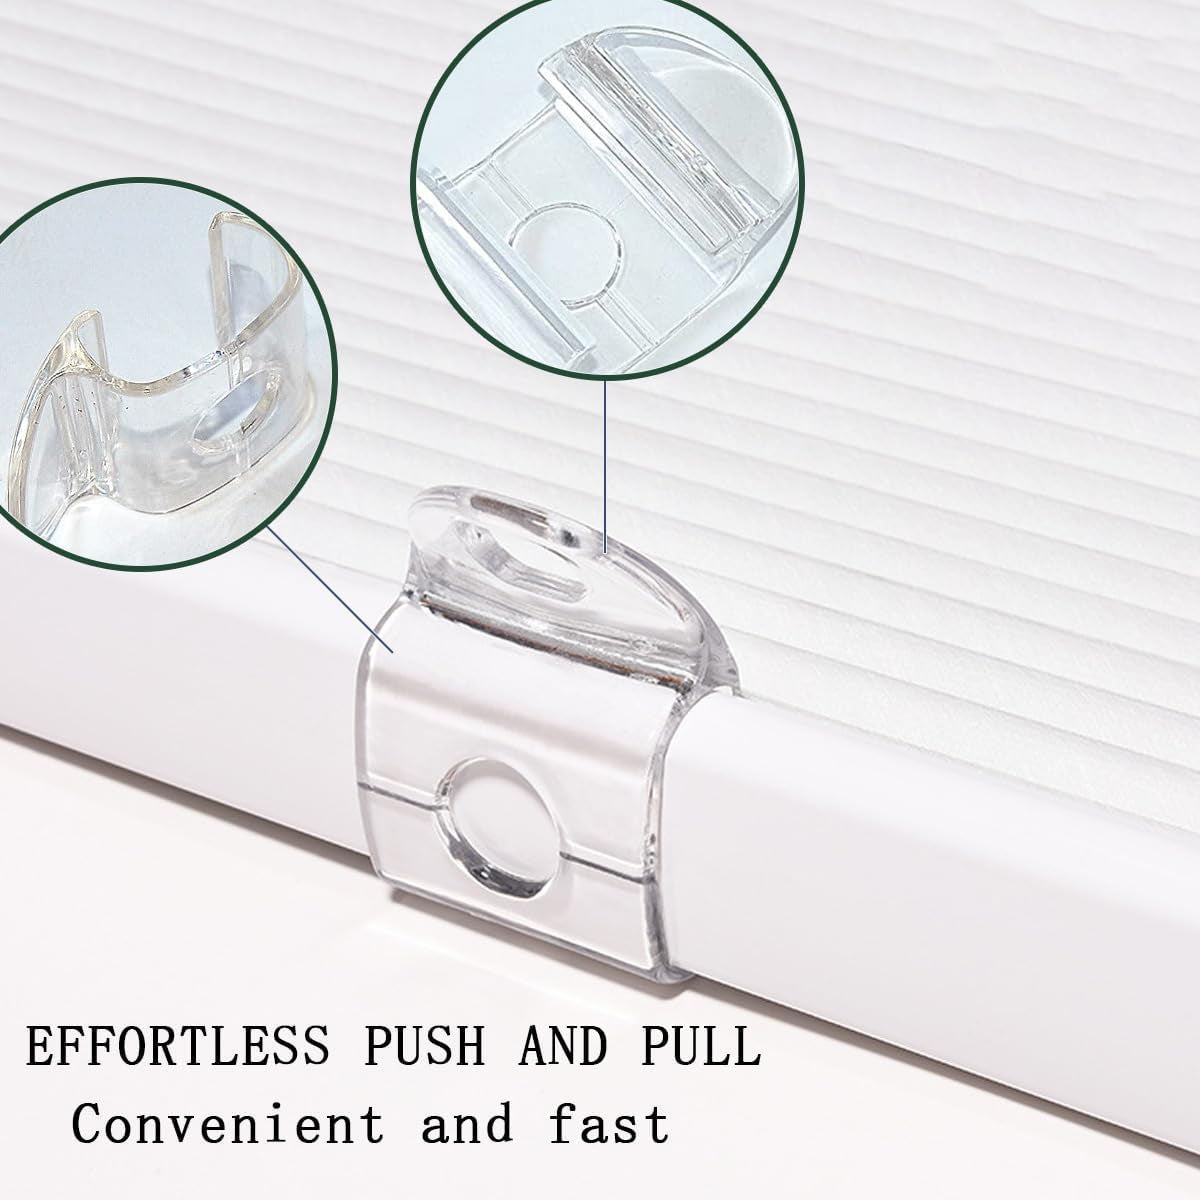 6 PCS Blinds Cordless Handles Clear Mini Plastic Honeycomb Roller Shades Hem Grips Shade Window Lift Handles Curtain Hardware Hooks for PVC Cordless Blinds Bottom Rail Roller Blinds Accessories